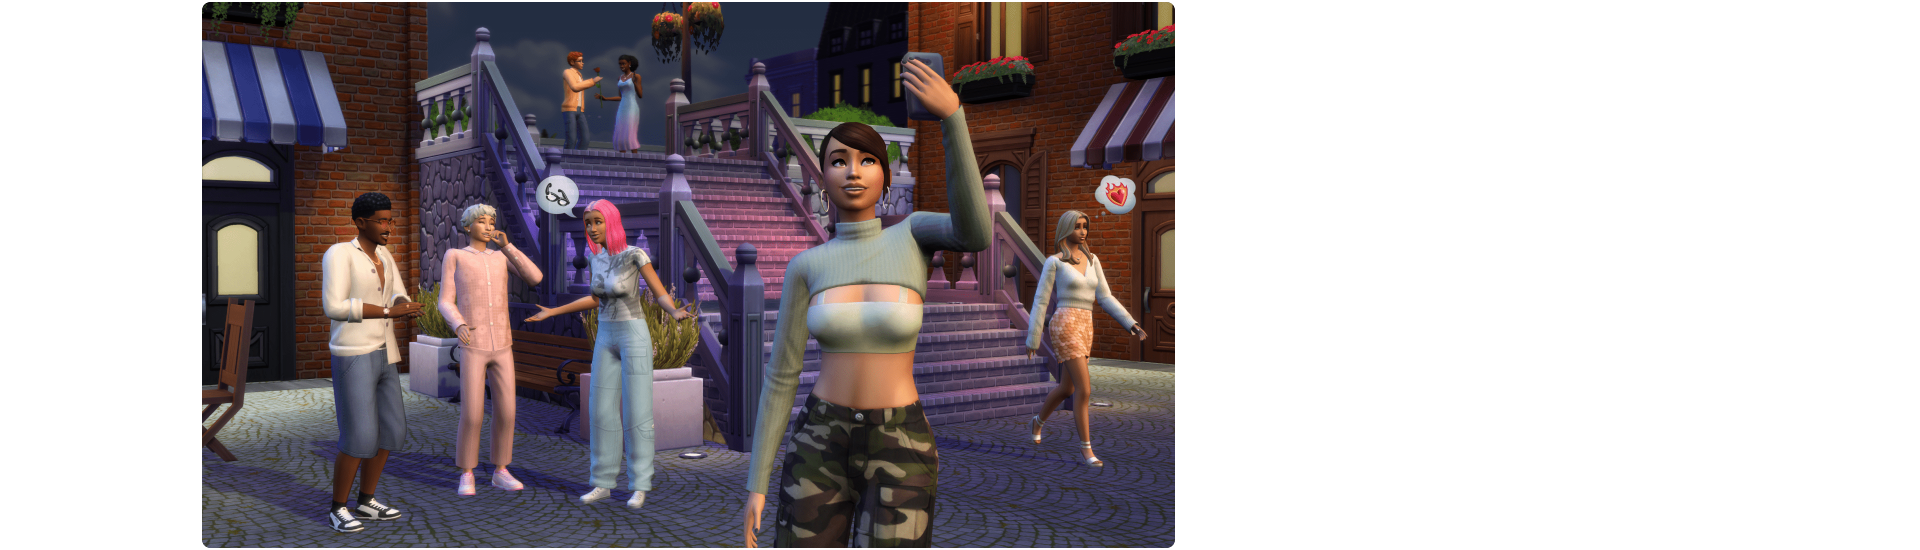 ts4-kit-14-hero-md-features-02-7x2-xl.png.adapt.crop7x2.1920w